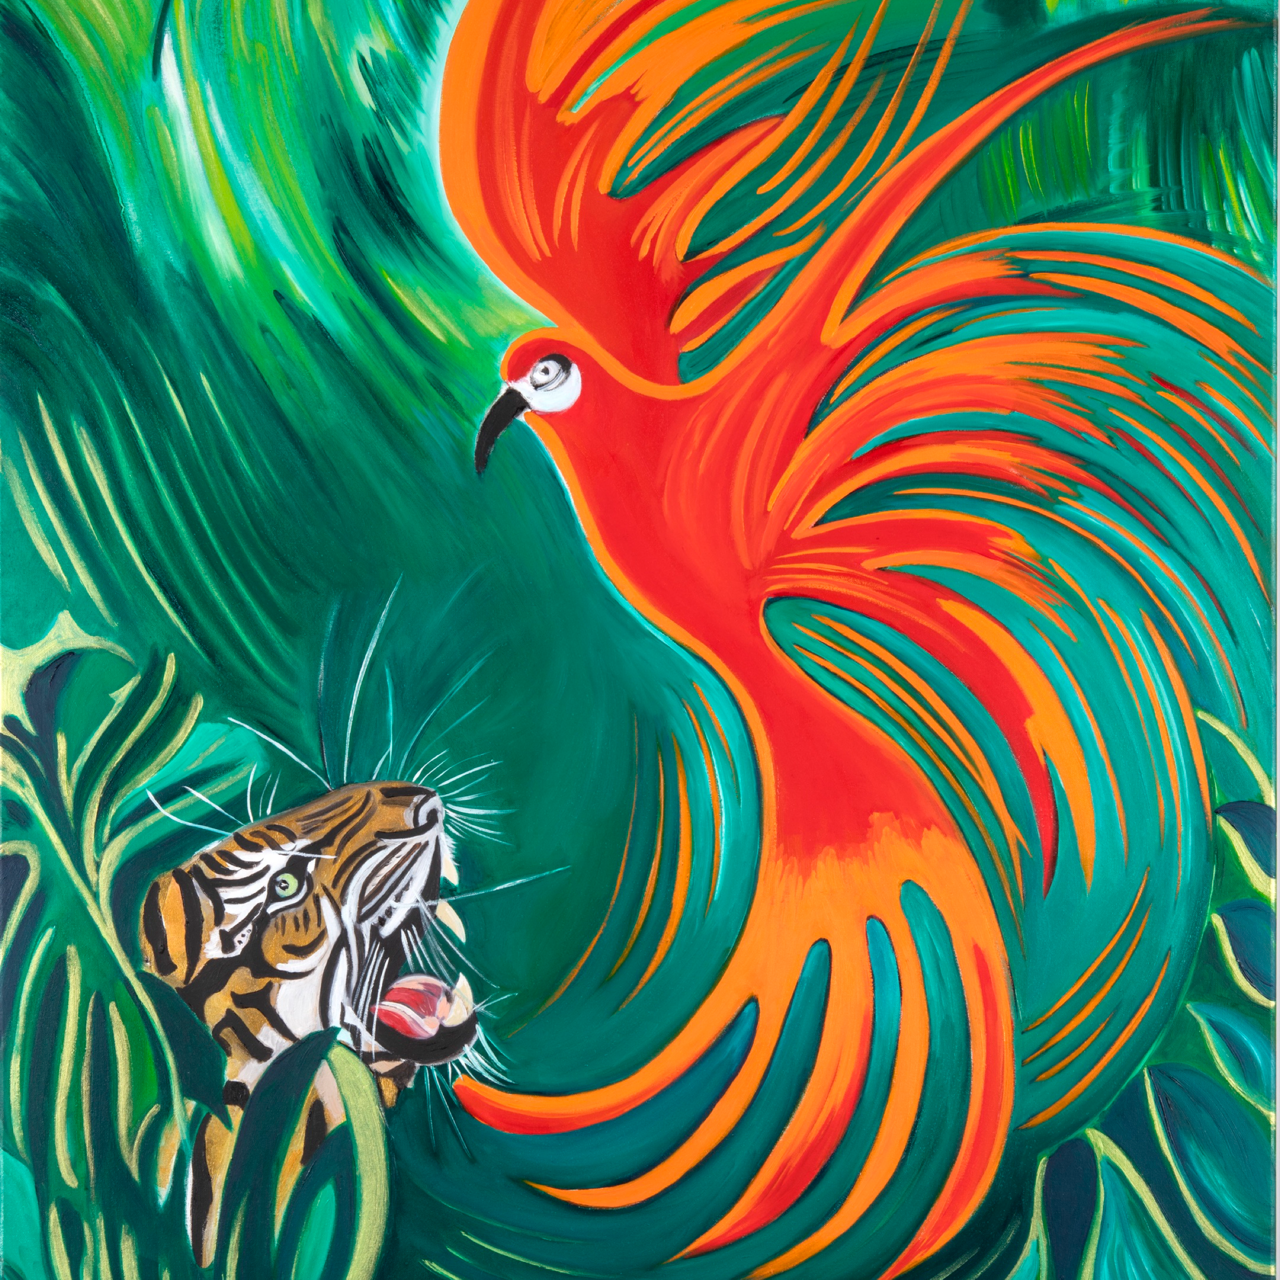 oil on canvas oil painting representing a magnificent bird in red and orange facing a tiger